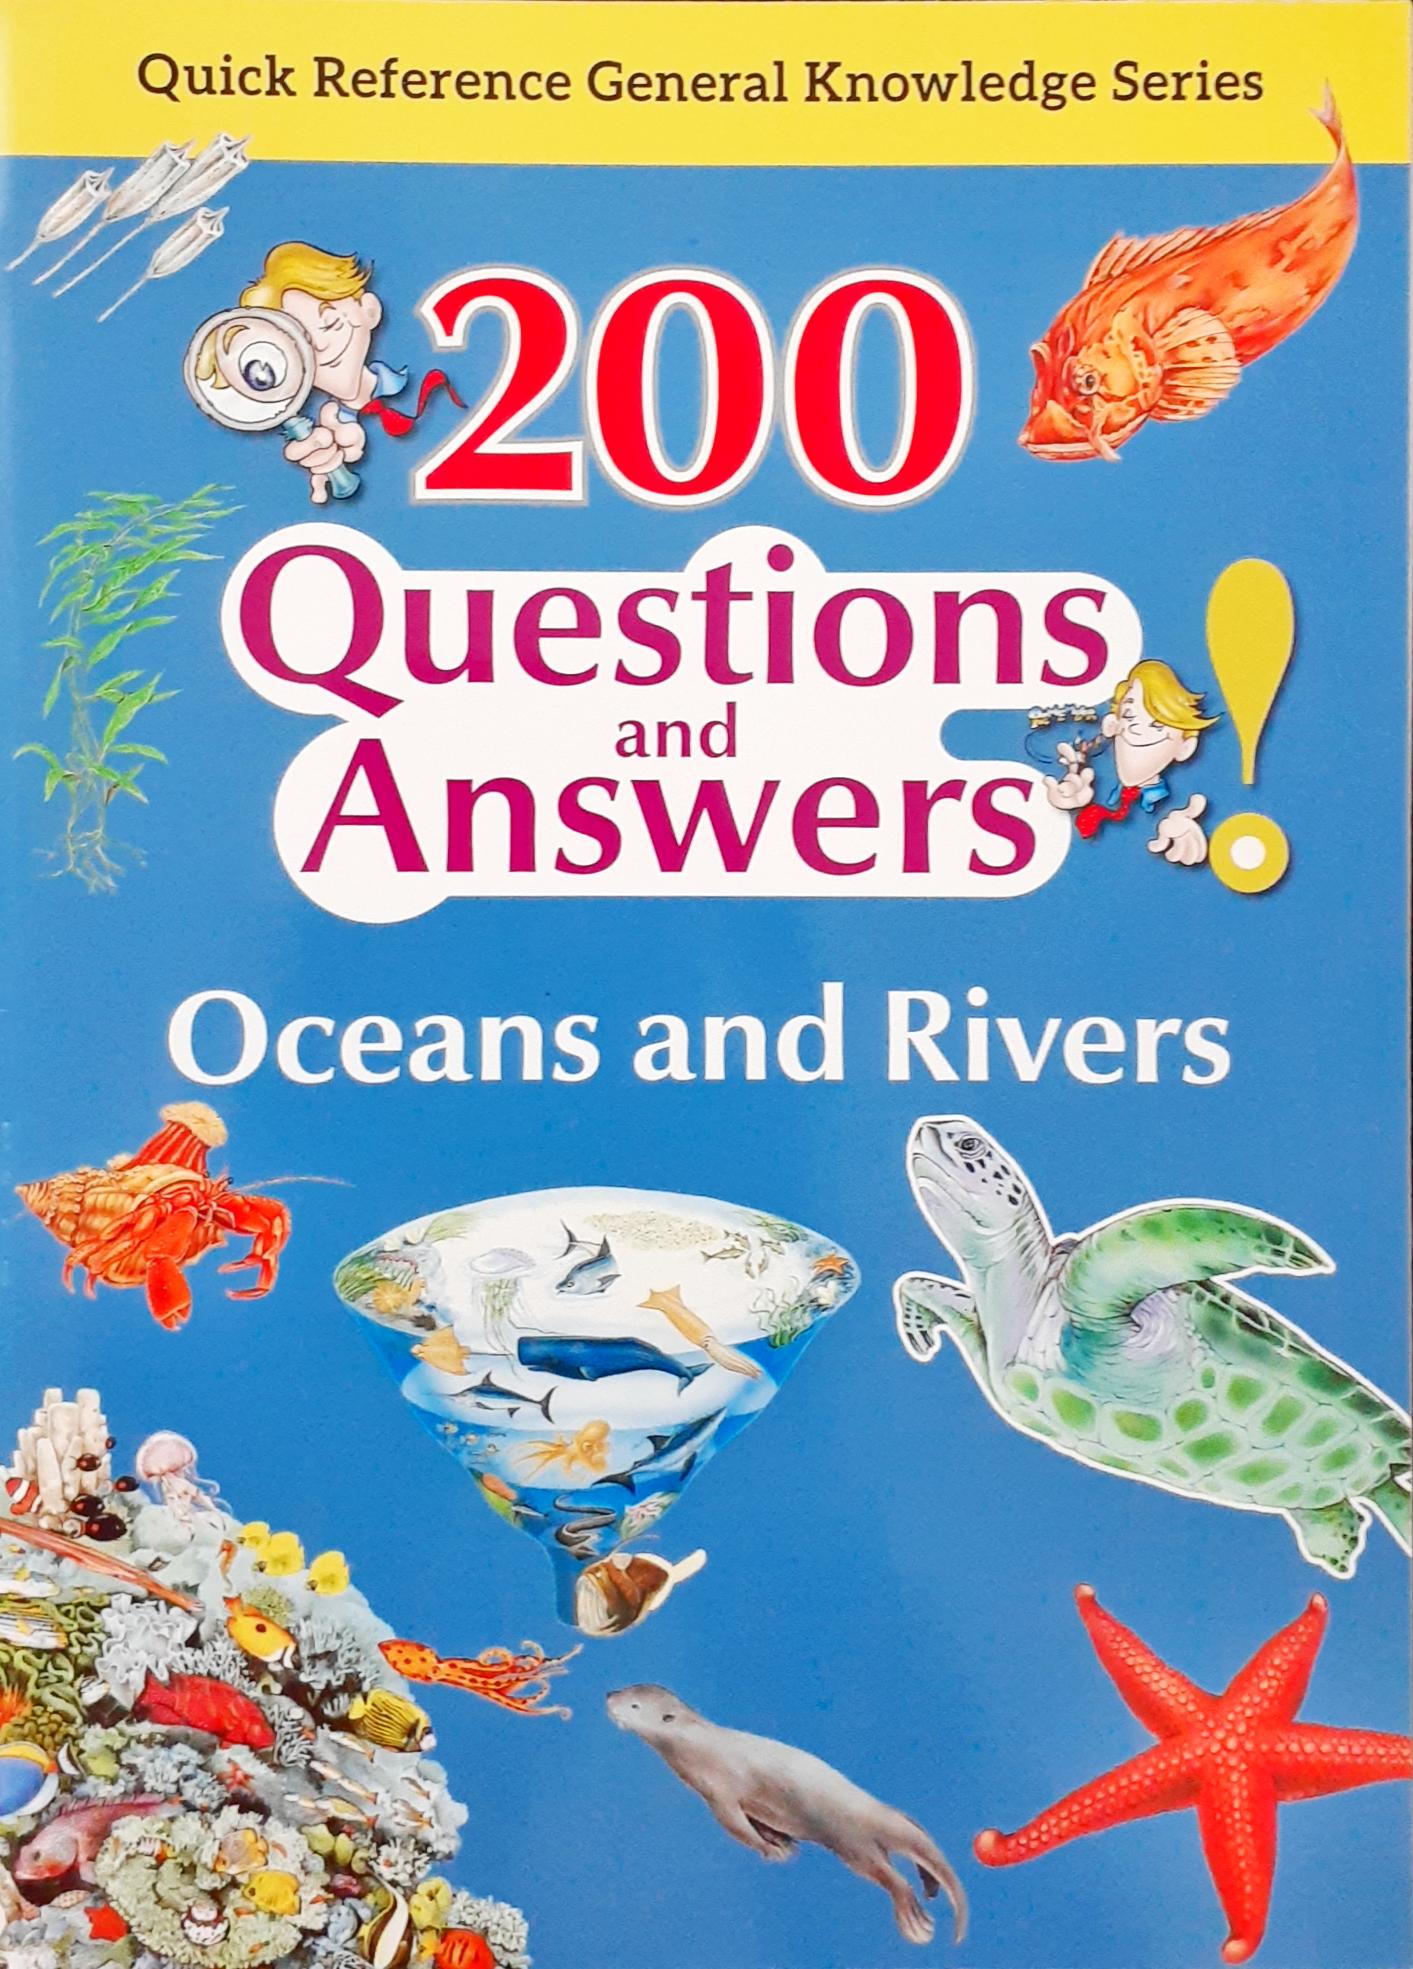 200 Questions & Answers: 17 Books Collection, General knowledge series -  Imen Connexions